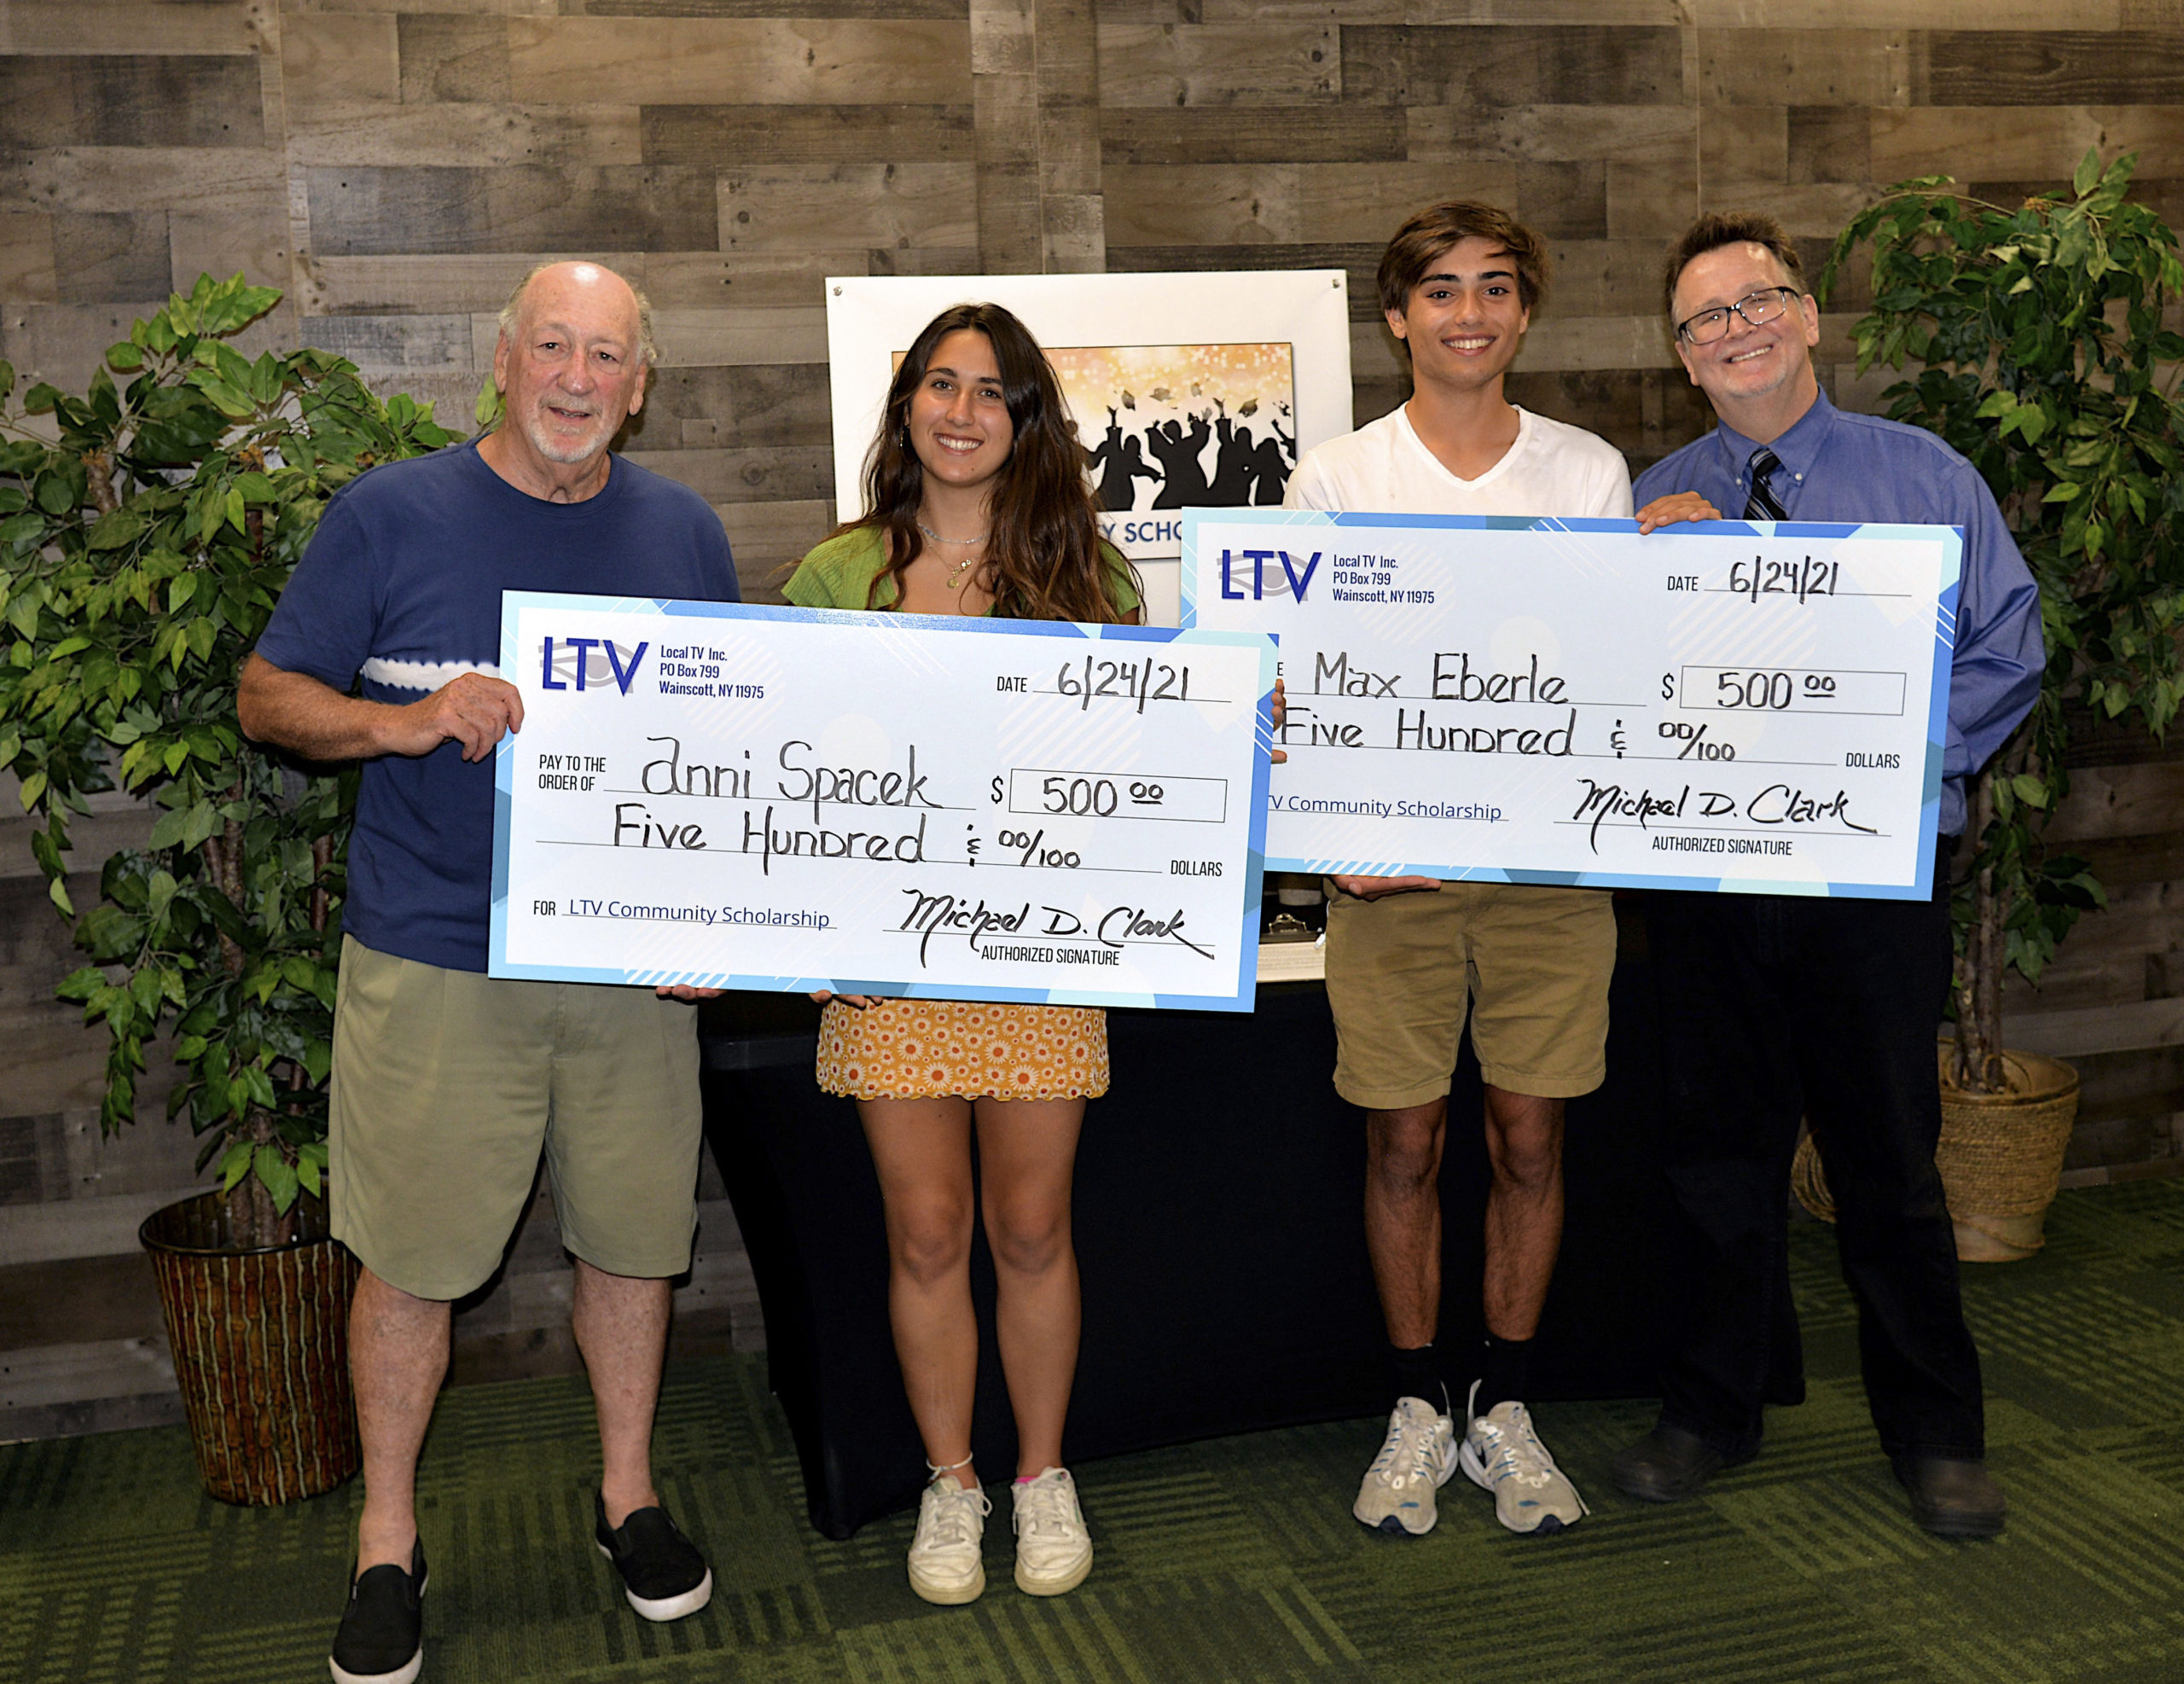 LTV presented $500  scholarships to East Hampton students  Anni Spacek and Max Eberle on June 24. The LTV Community Scholarship is presented to students with a passion for community media, lifelong learning, and free speech and  who are pursuing an education in film, television, broadcasting or radio.  With the students are  LTV Chairman Jon Olken and Michael Clarke.   KYRIL BROMLEY